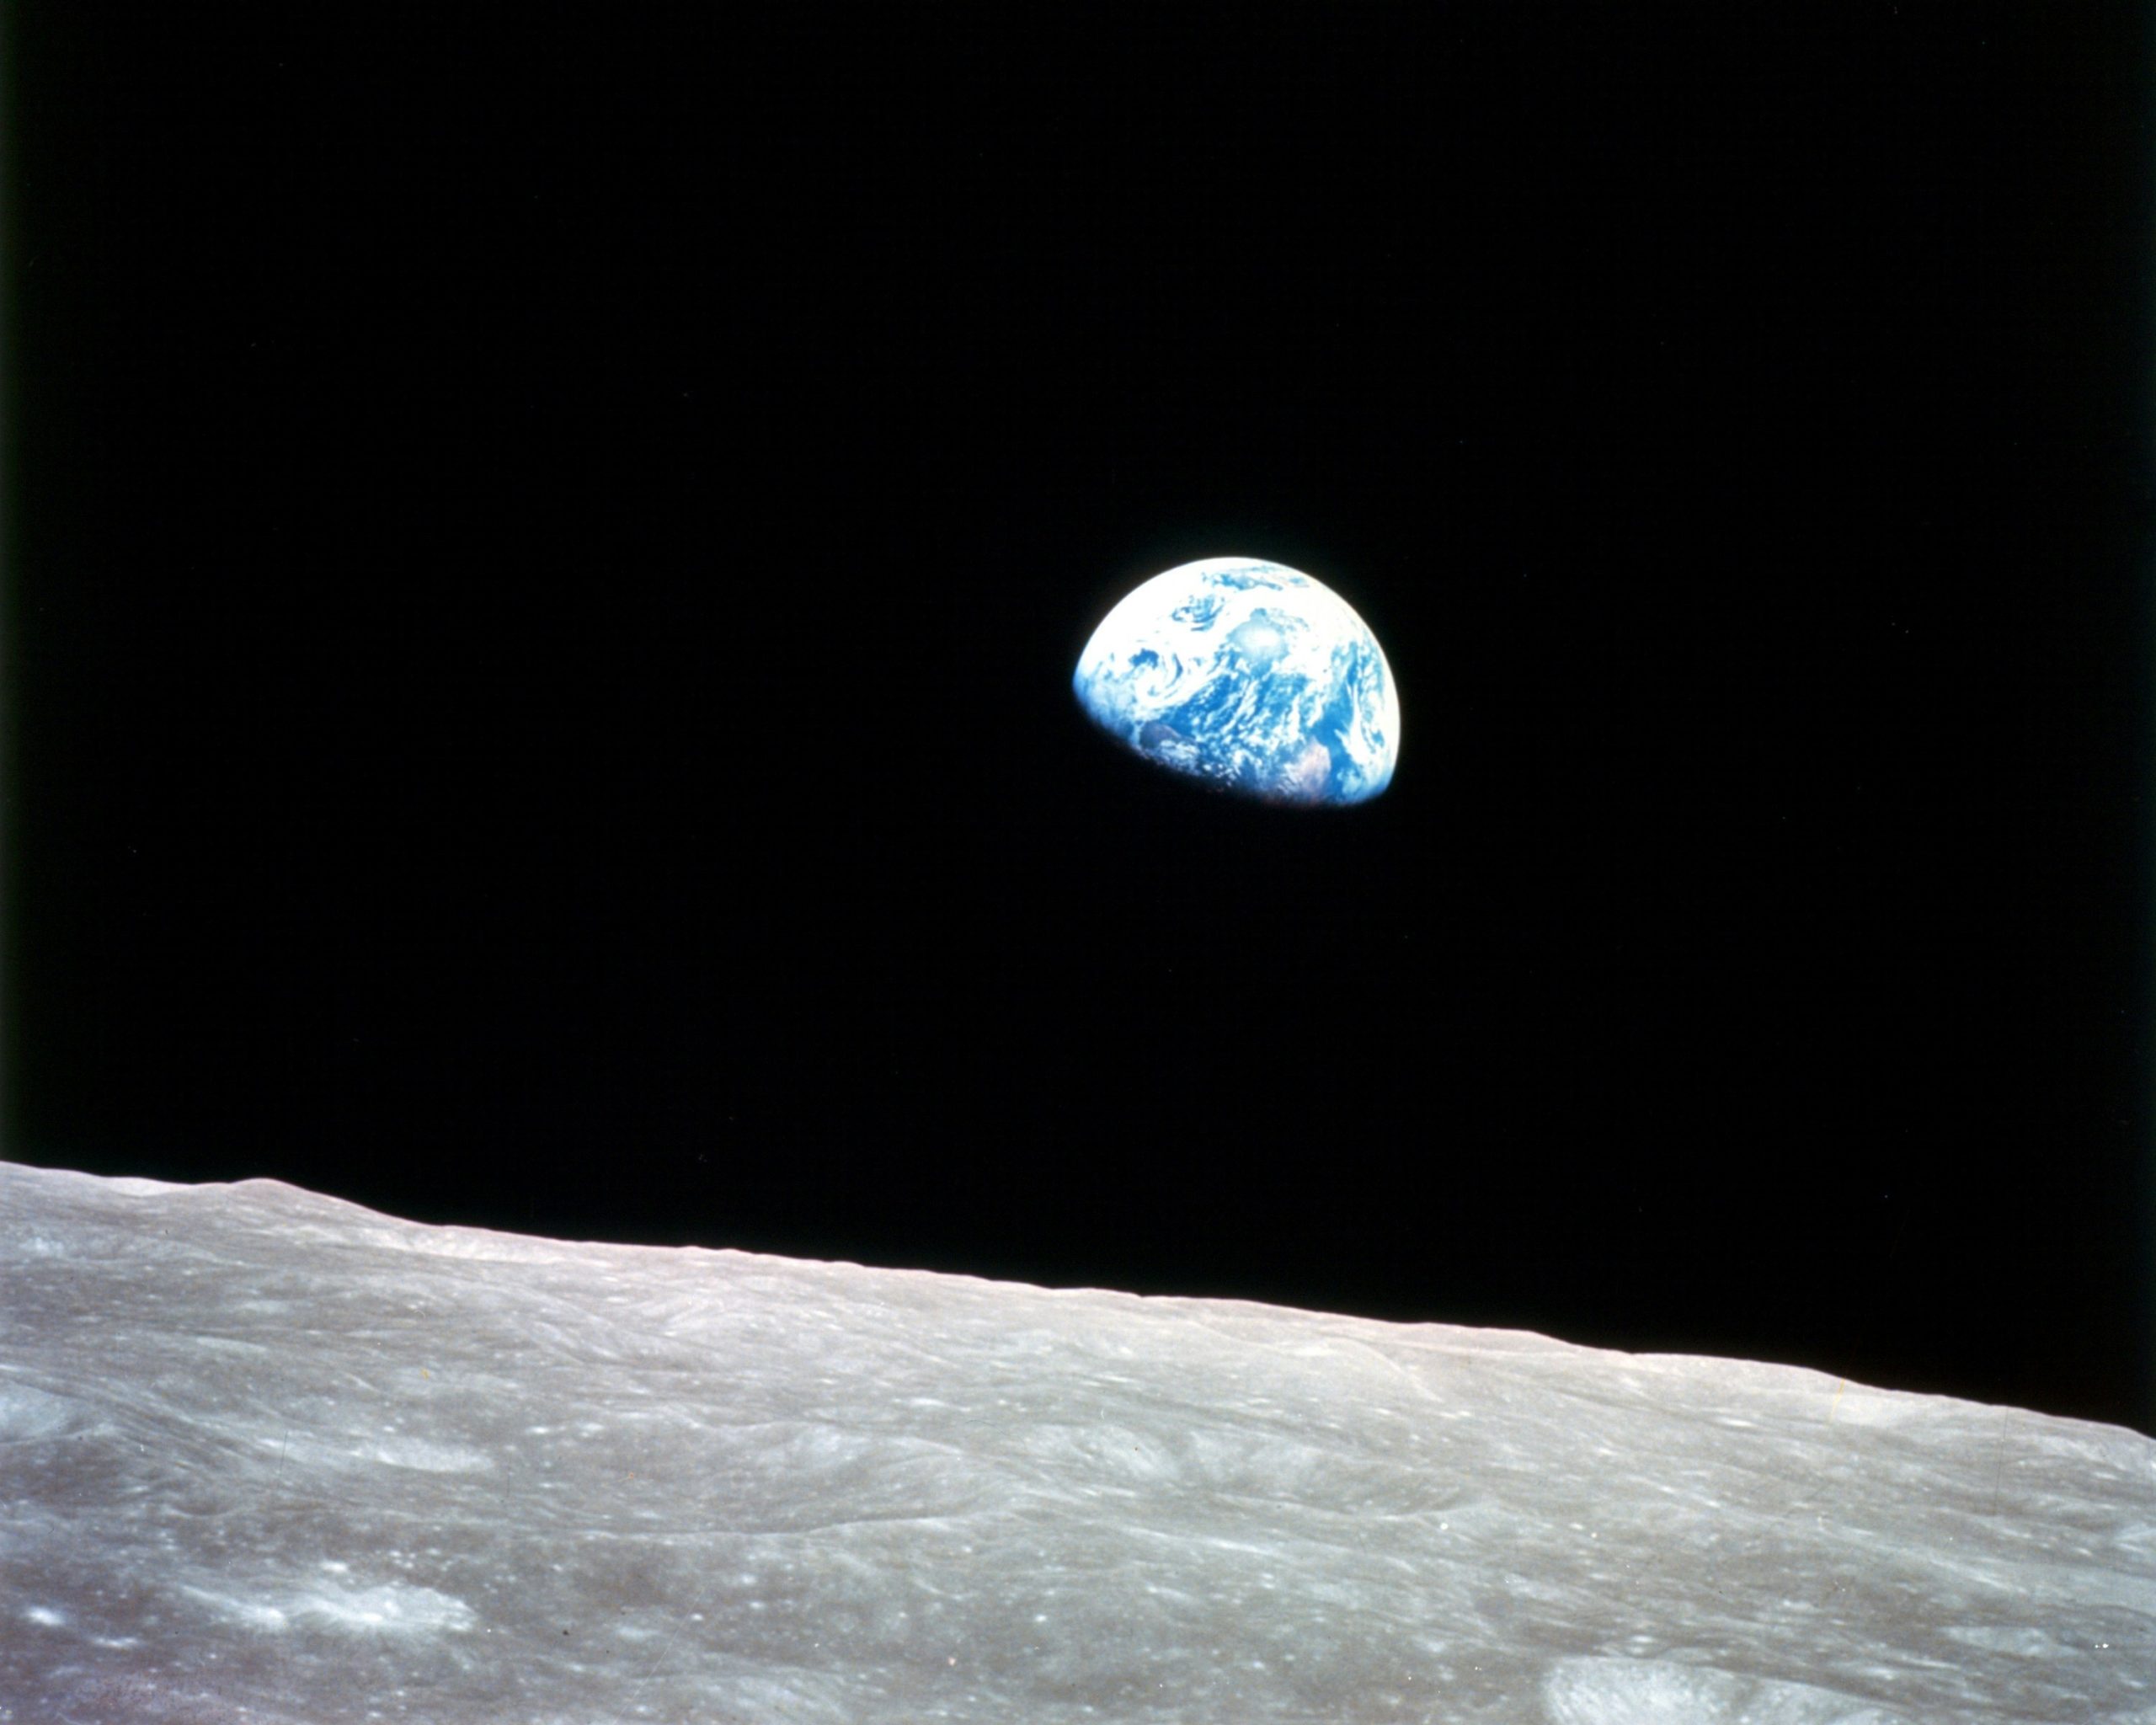 Earth rising above the horizon seen from the moon.